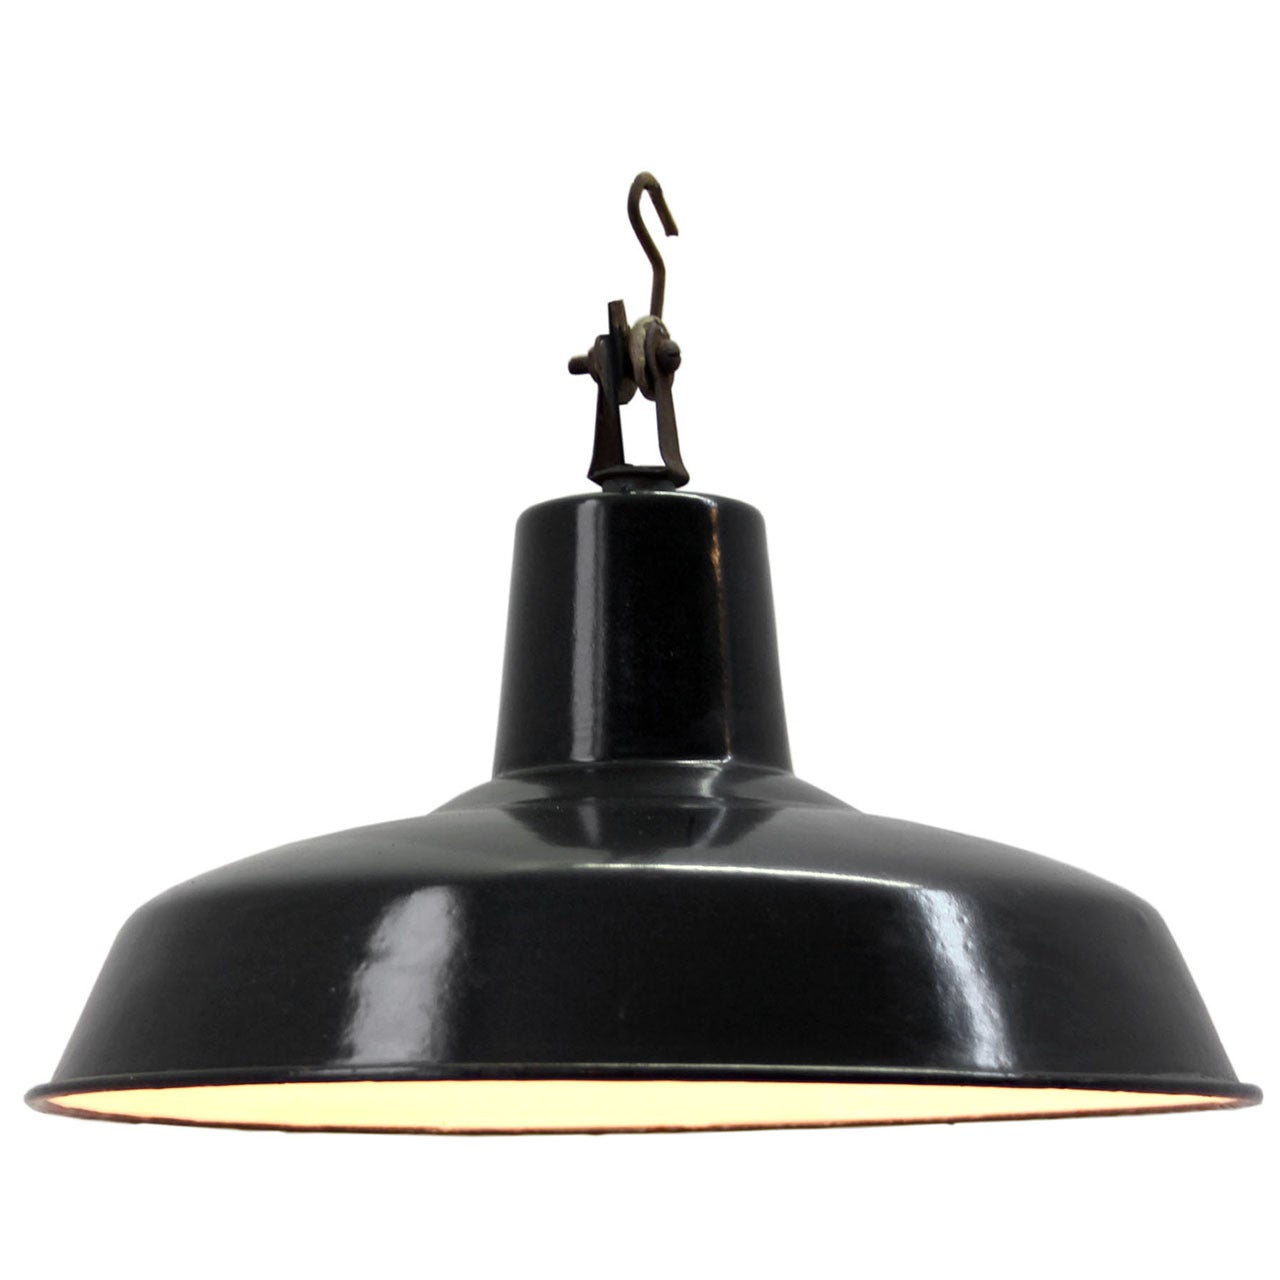 Alloue (1 in stock) | French Vintage Industrial Pendant